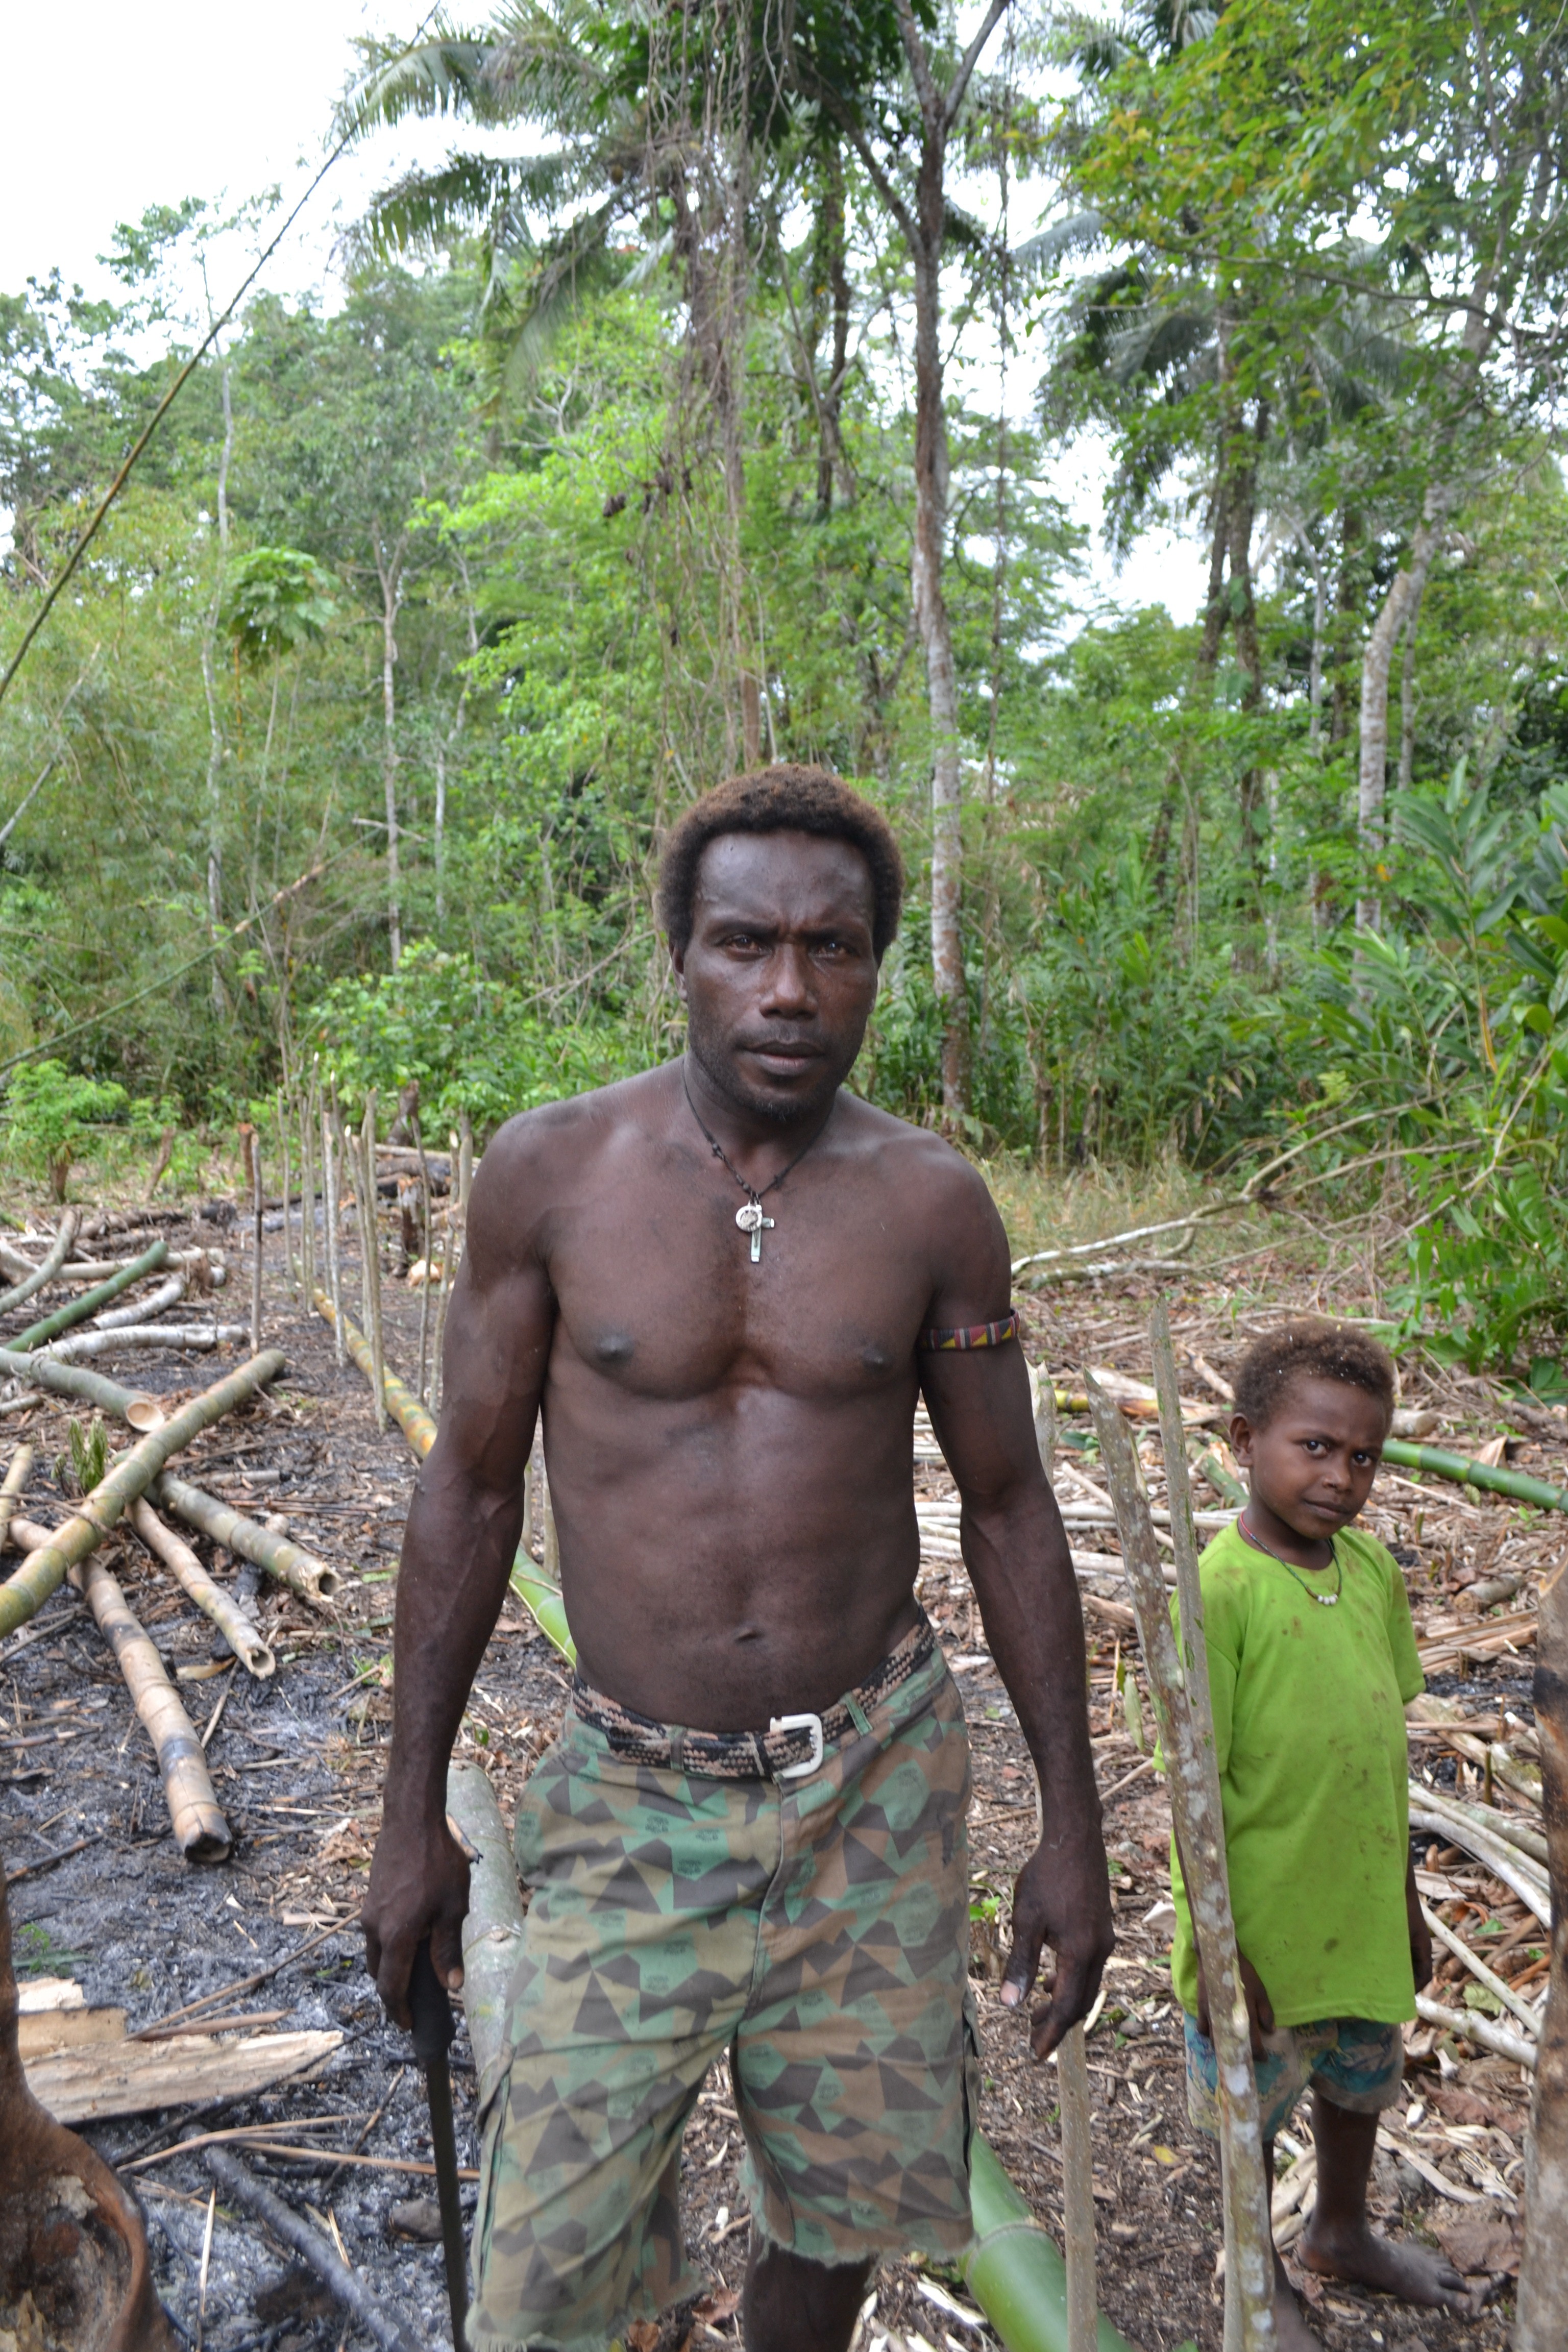 Villager Henry Tabu hopes that improvements touted by Nautilus will help him and his family. (Credit: Mike Casey) 